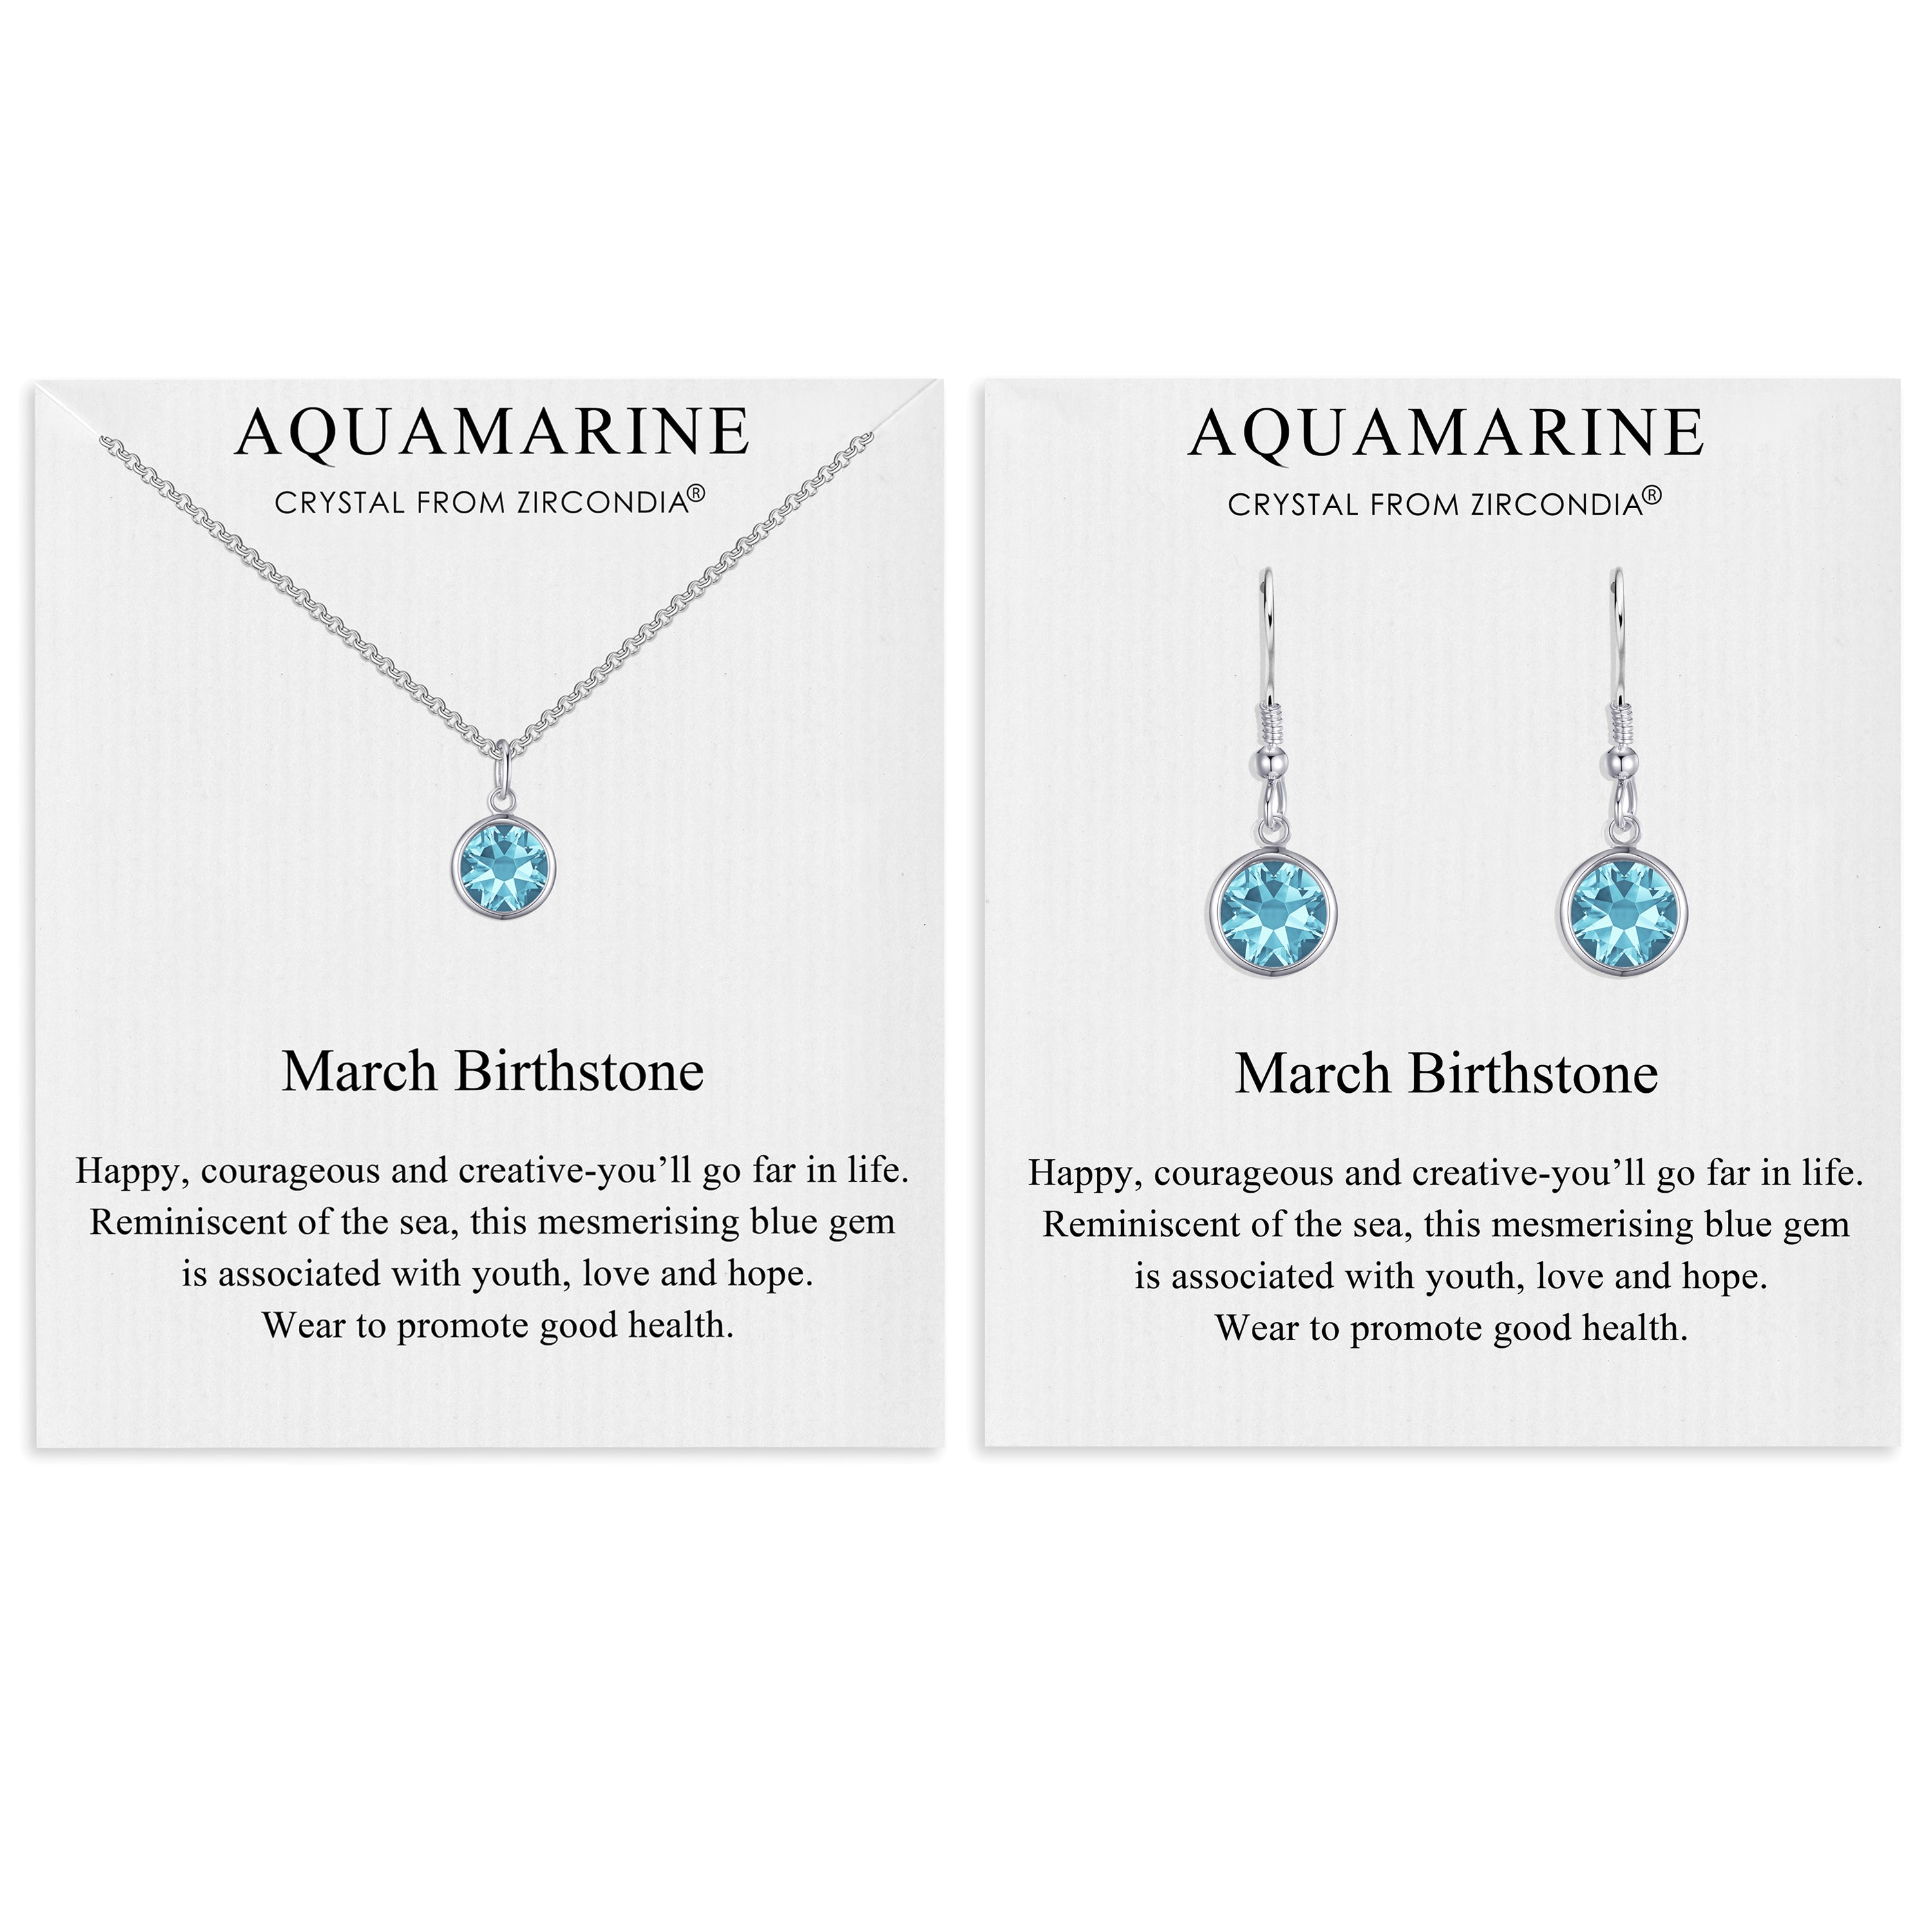 March (Aquamarine) Birthstone Necklace & Drop Earrings Set Created with Zircondia® Crystals by Philip Jones Jewellery